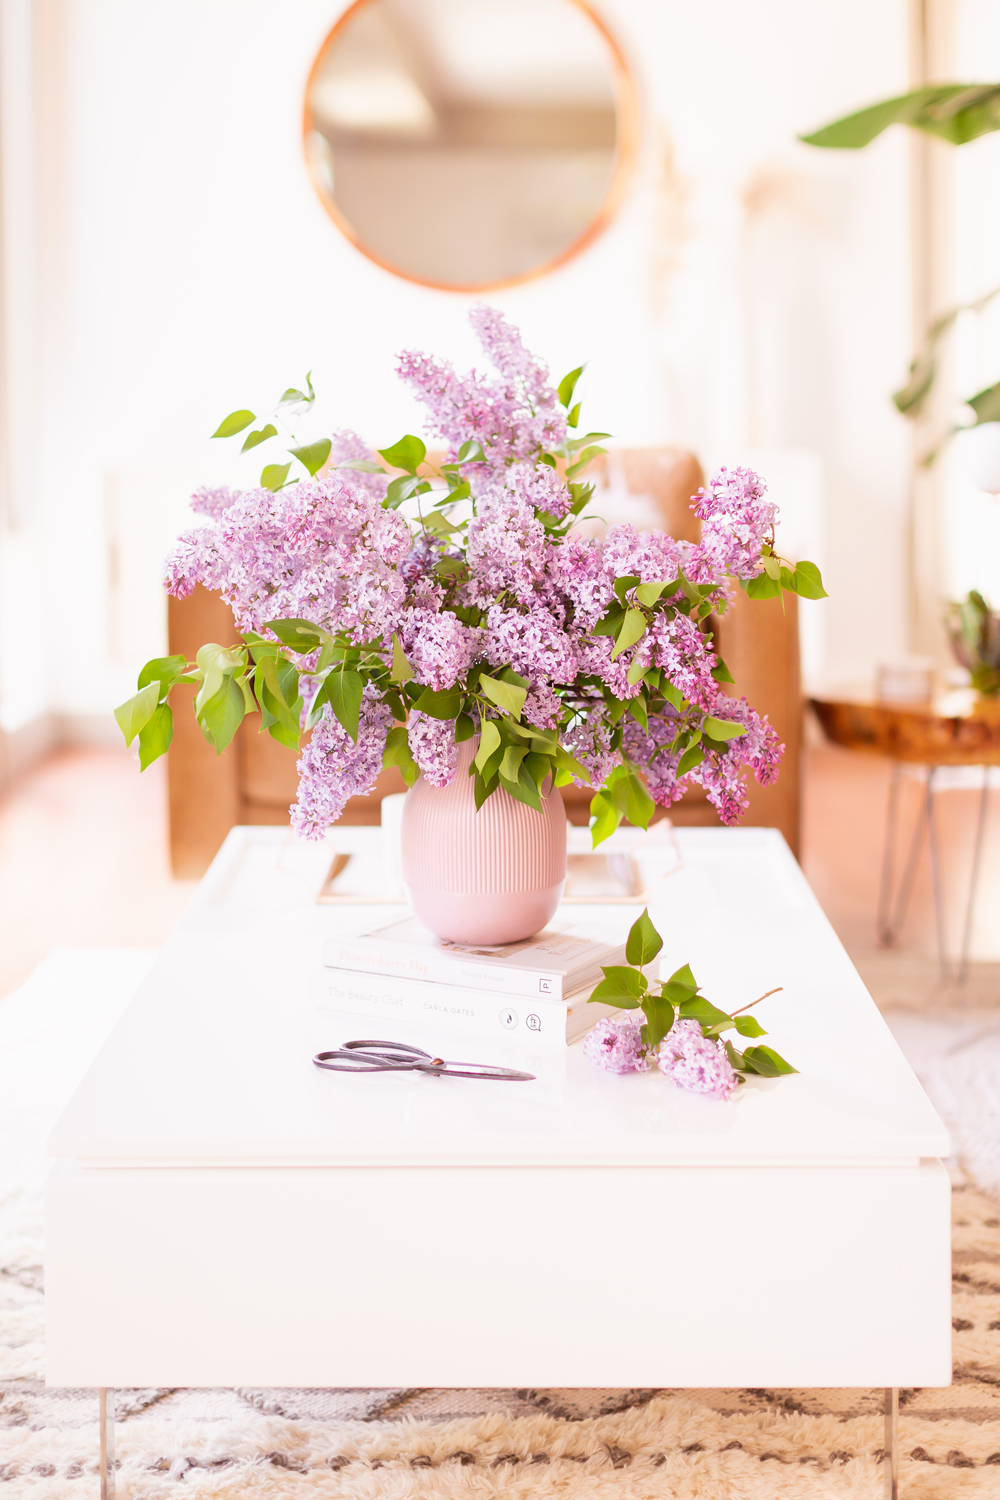 An oversized lilac bouquet and a pair of clippers on a white coffee table in JustineCelina’s light and airy mid century meets boho modern living room | DIY Lilac Flower Arrangement | How to Forage Lilacs | How to Prolong Lilac Vase Life | How to Arrange Lilacs | Fresh Lilac Flower Bouquet | Extremely Pretty Lilac Arrangement | Purple Lilac Arrangement | How to Cut Lilacs from a tree or bush | Calgary Creative Lifestyle Blogger // JustineCelina.com